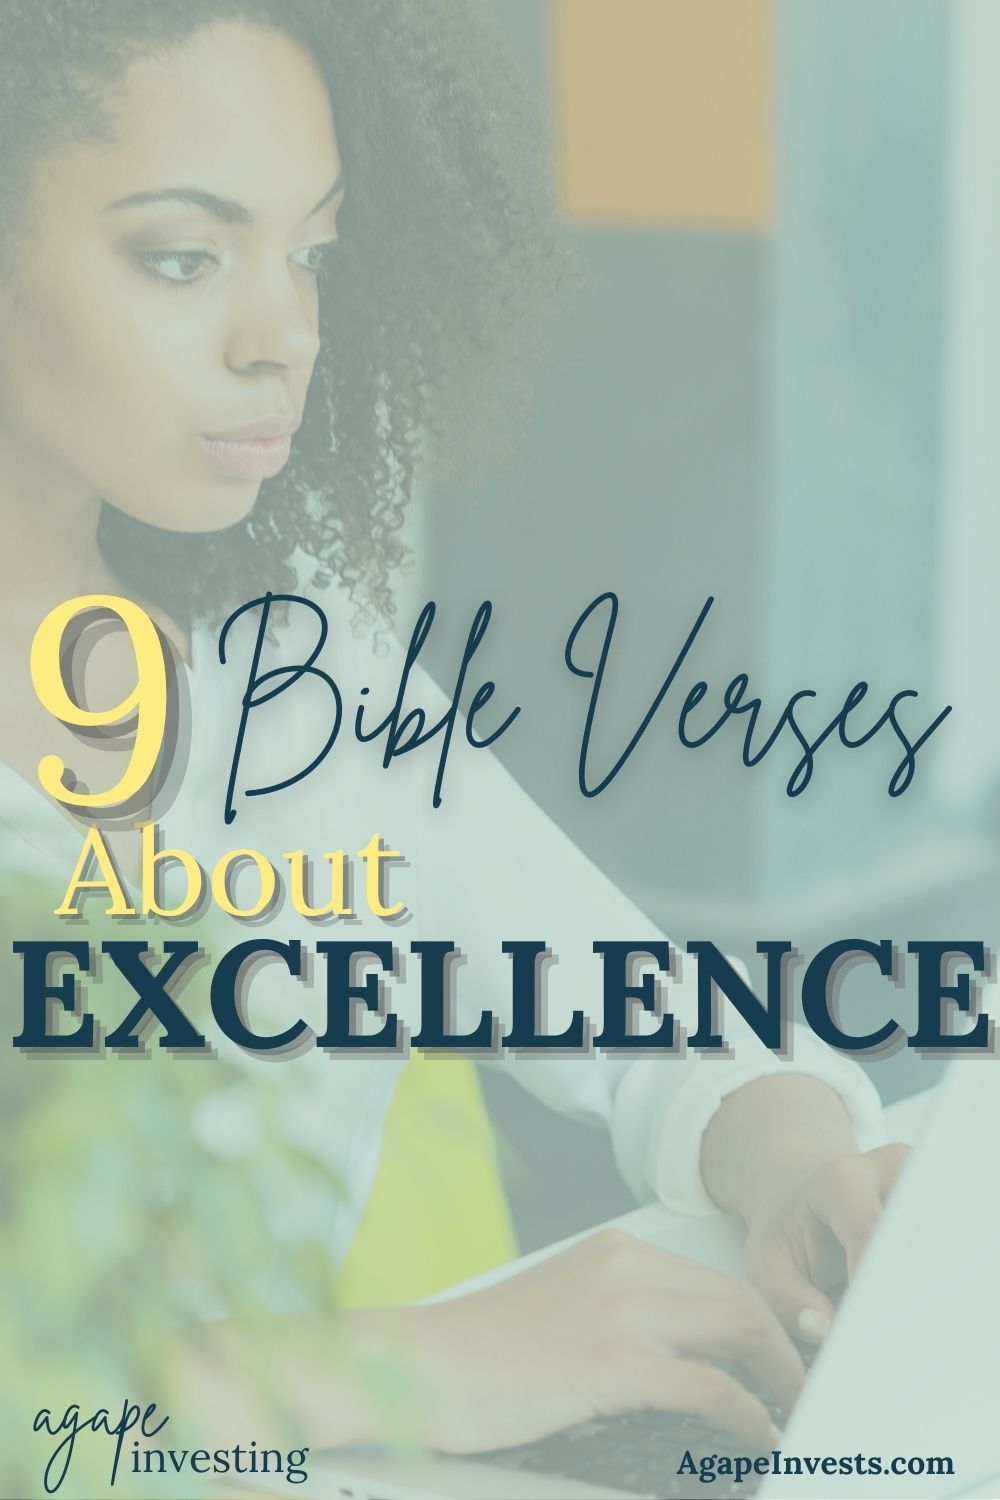 Christians should be the best in every industry. If we truly were the best how would that impact our industries? How would the view of modern Christians change? Would people begin to see the true goodness of God through our good works? Let's look at 9 bible verses about excellence to find out how we can be excellent in whatever we do.